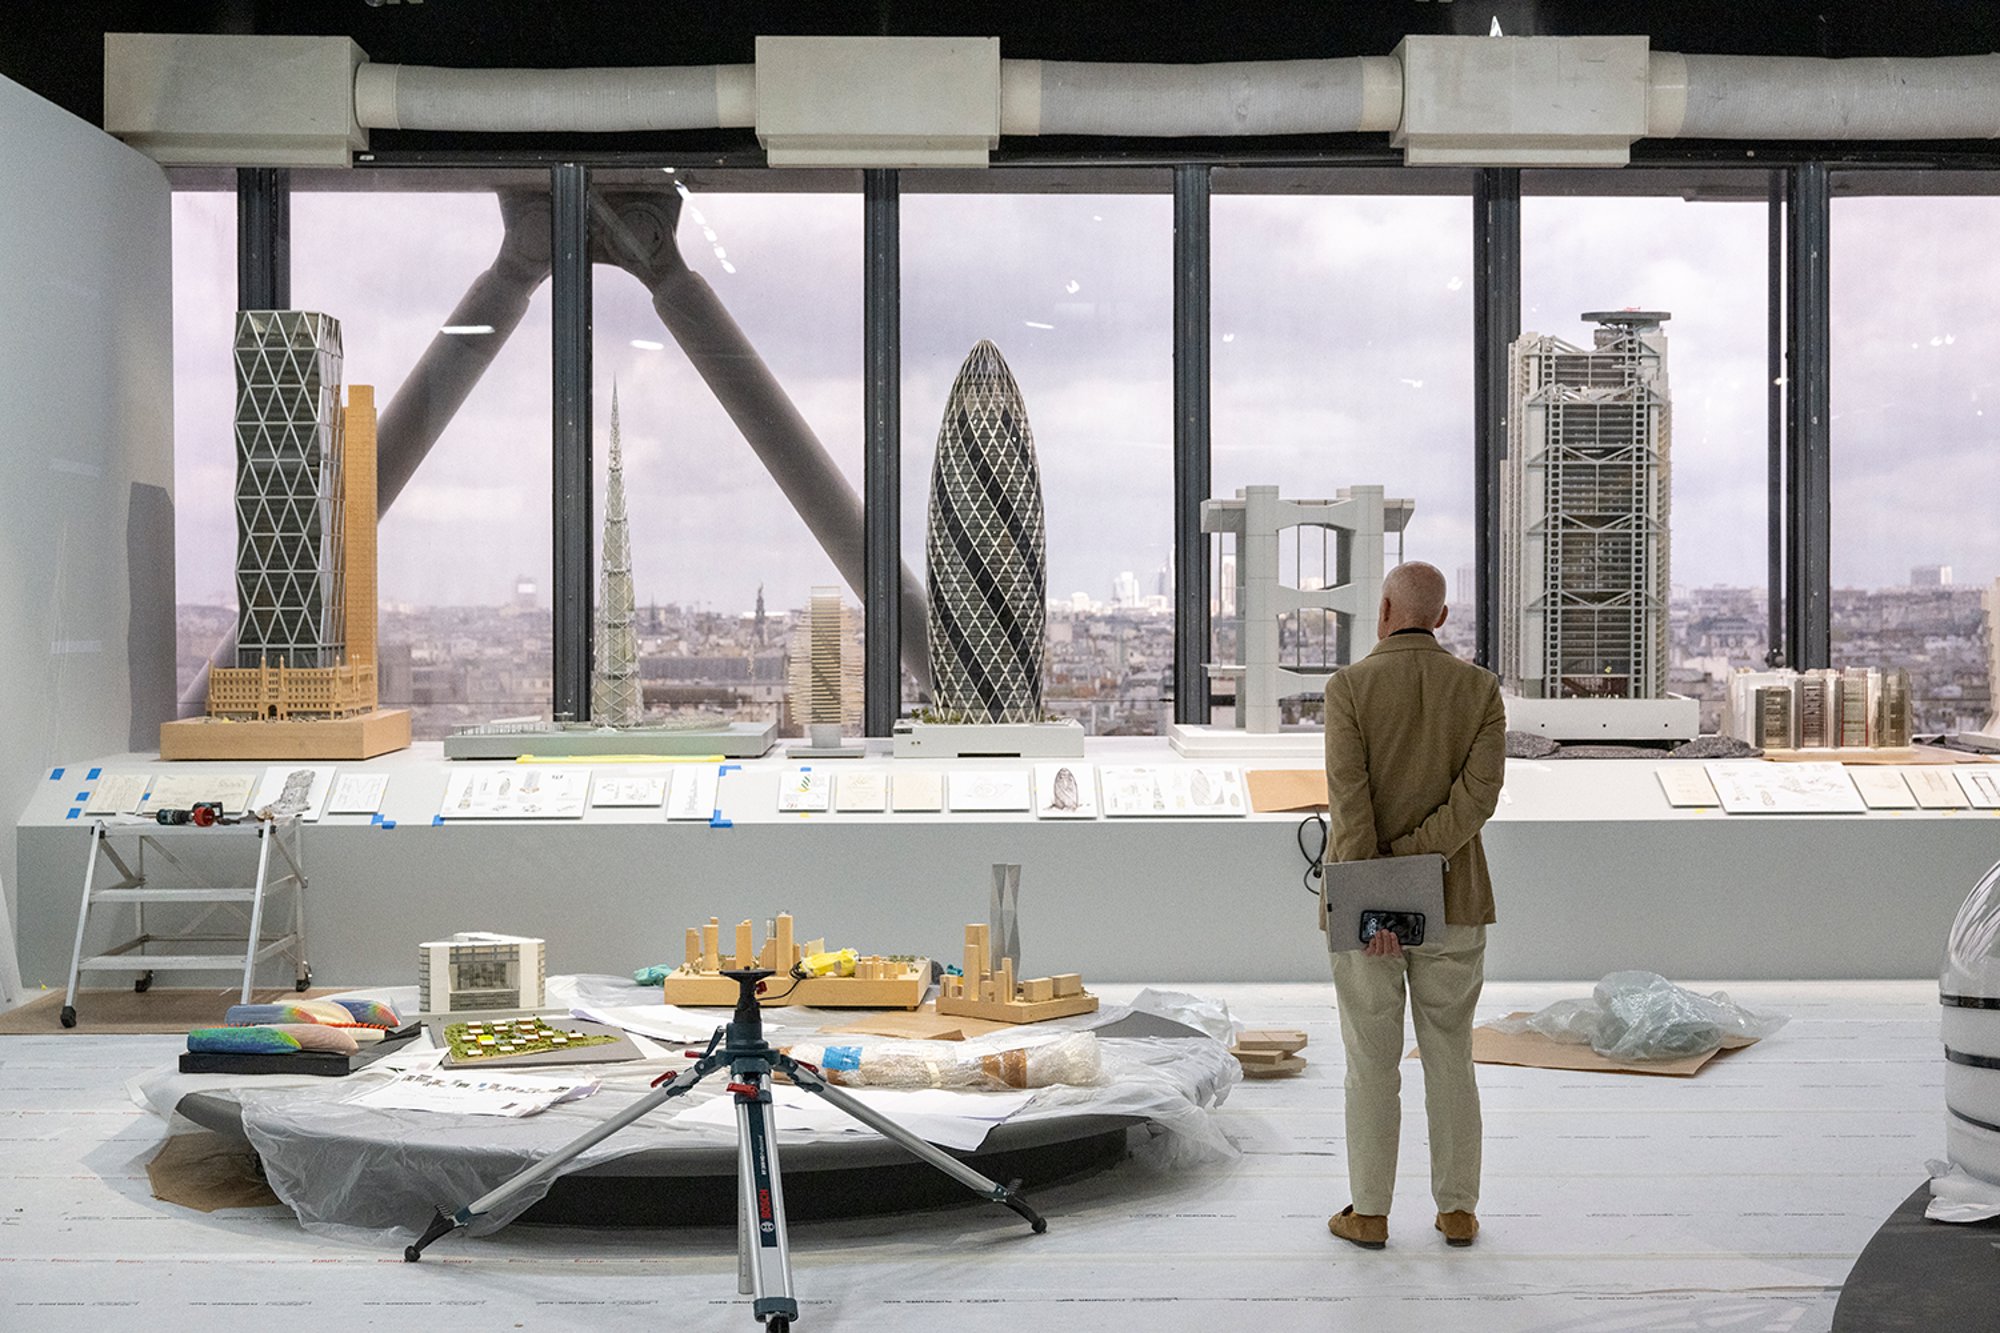 Norman Foster standing back to view 'The Vertical City' models, including Hearst Tower, Millennium Tower, 30 St Mary Axe and Hongkong and Shanghai Bank Headquarters (left to right).